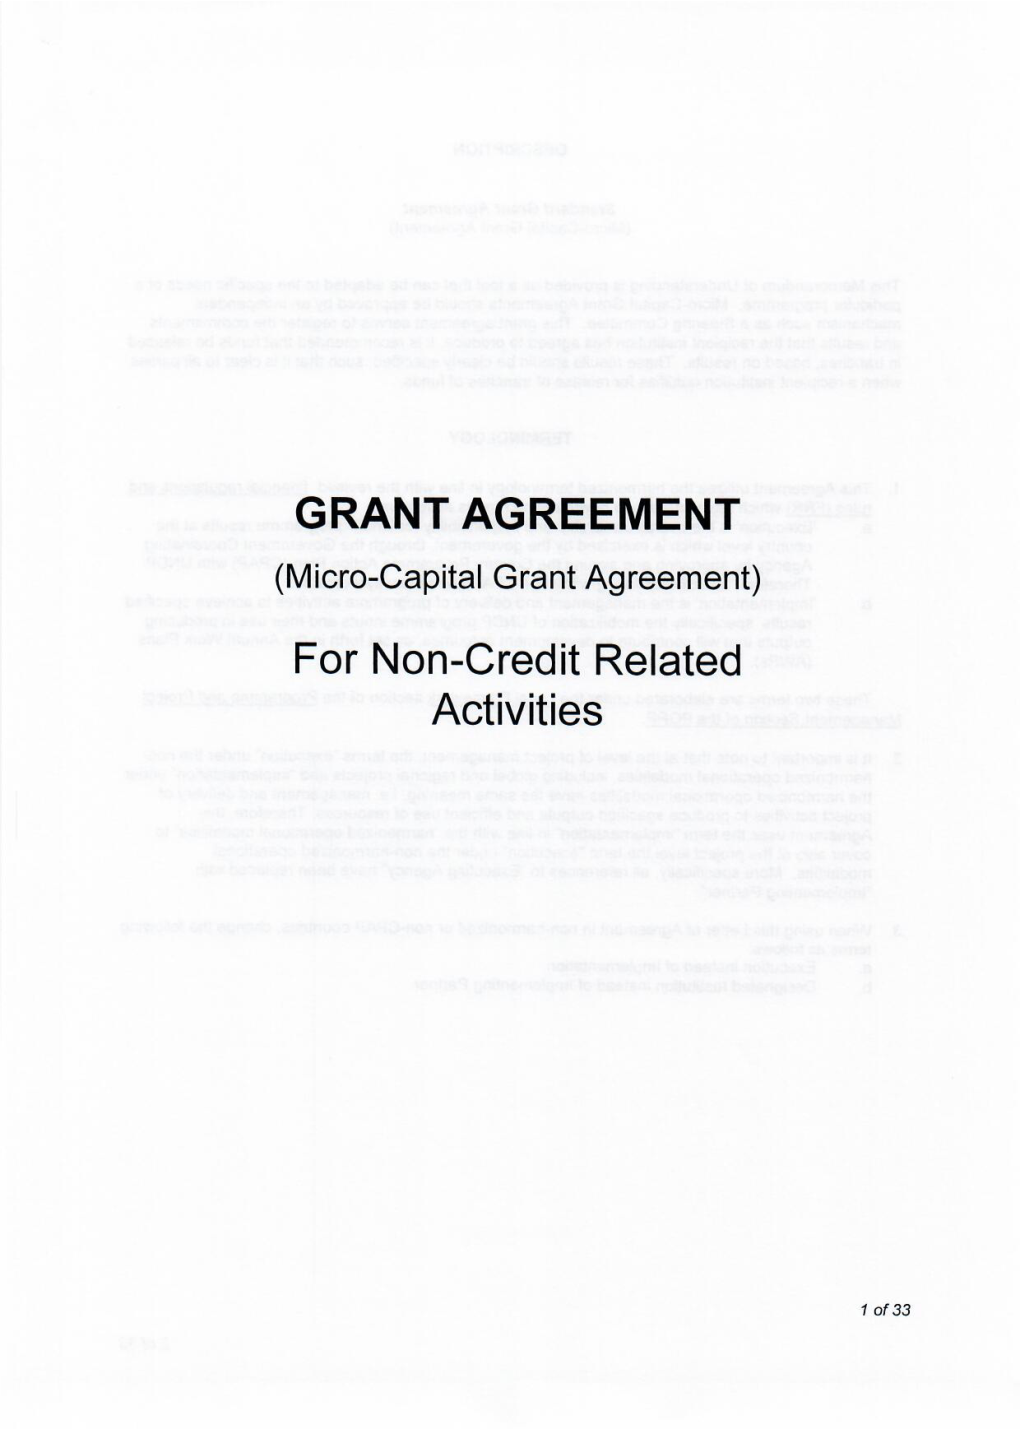 Standard Grant Agreement for Non-Credit Related Activities